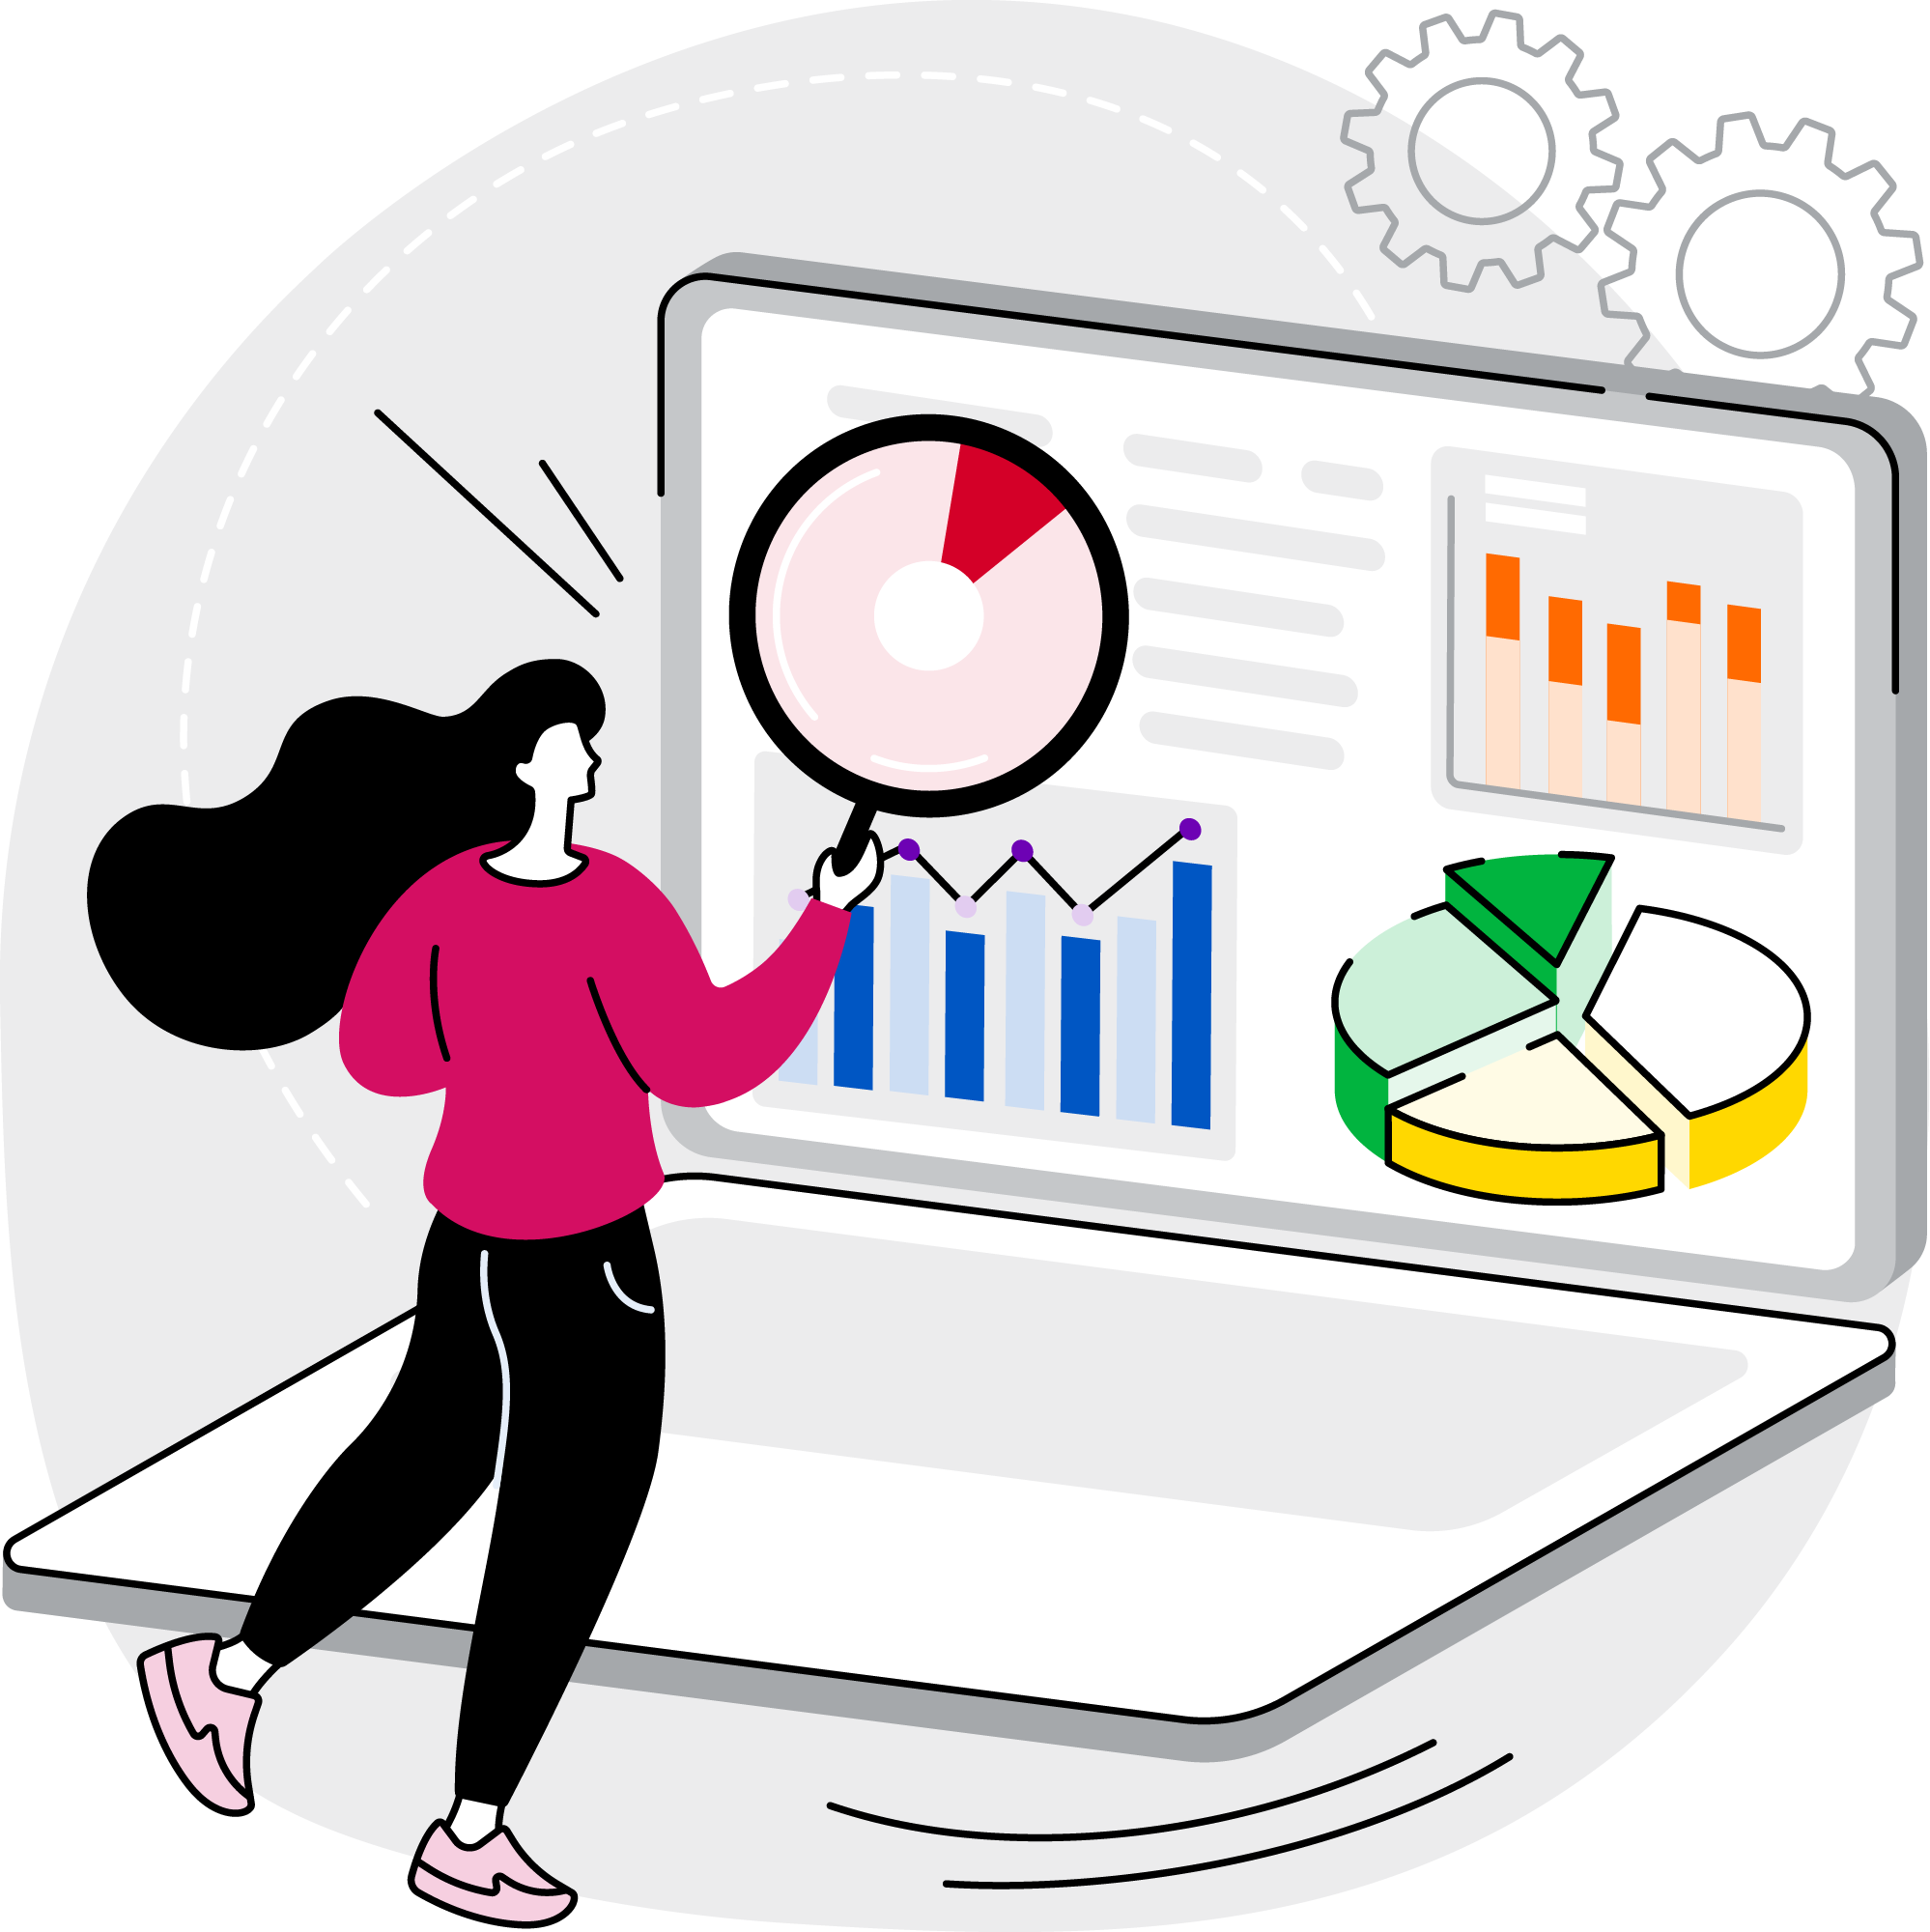 A colorful 2D illustration of a woman examining a pitch deck on an oversized laptop.